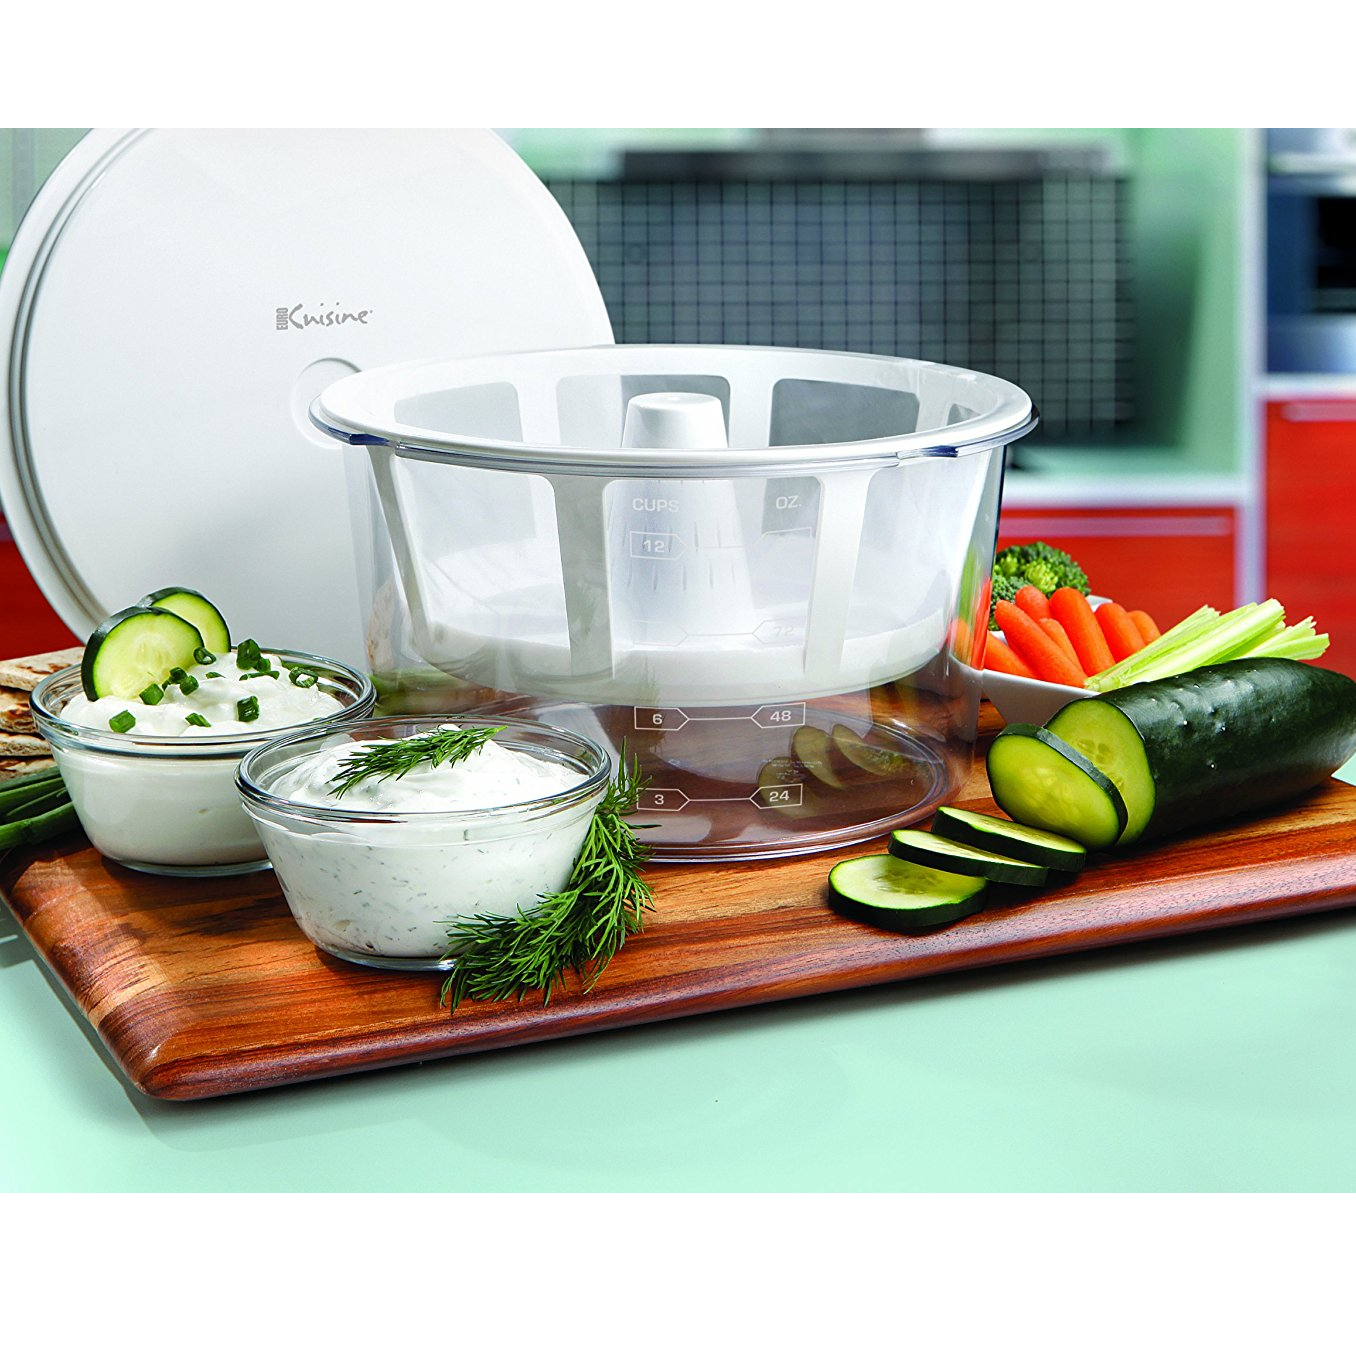 Save Money With The Euro Cuisine GY50 Greek Yogurt Maker Just $16.20!